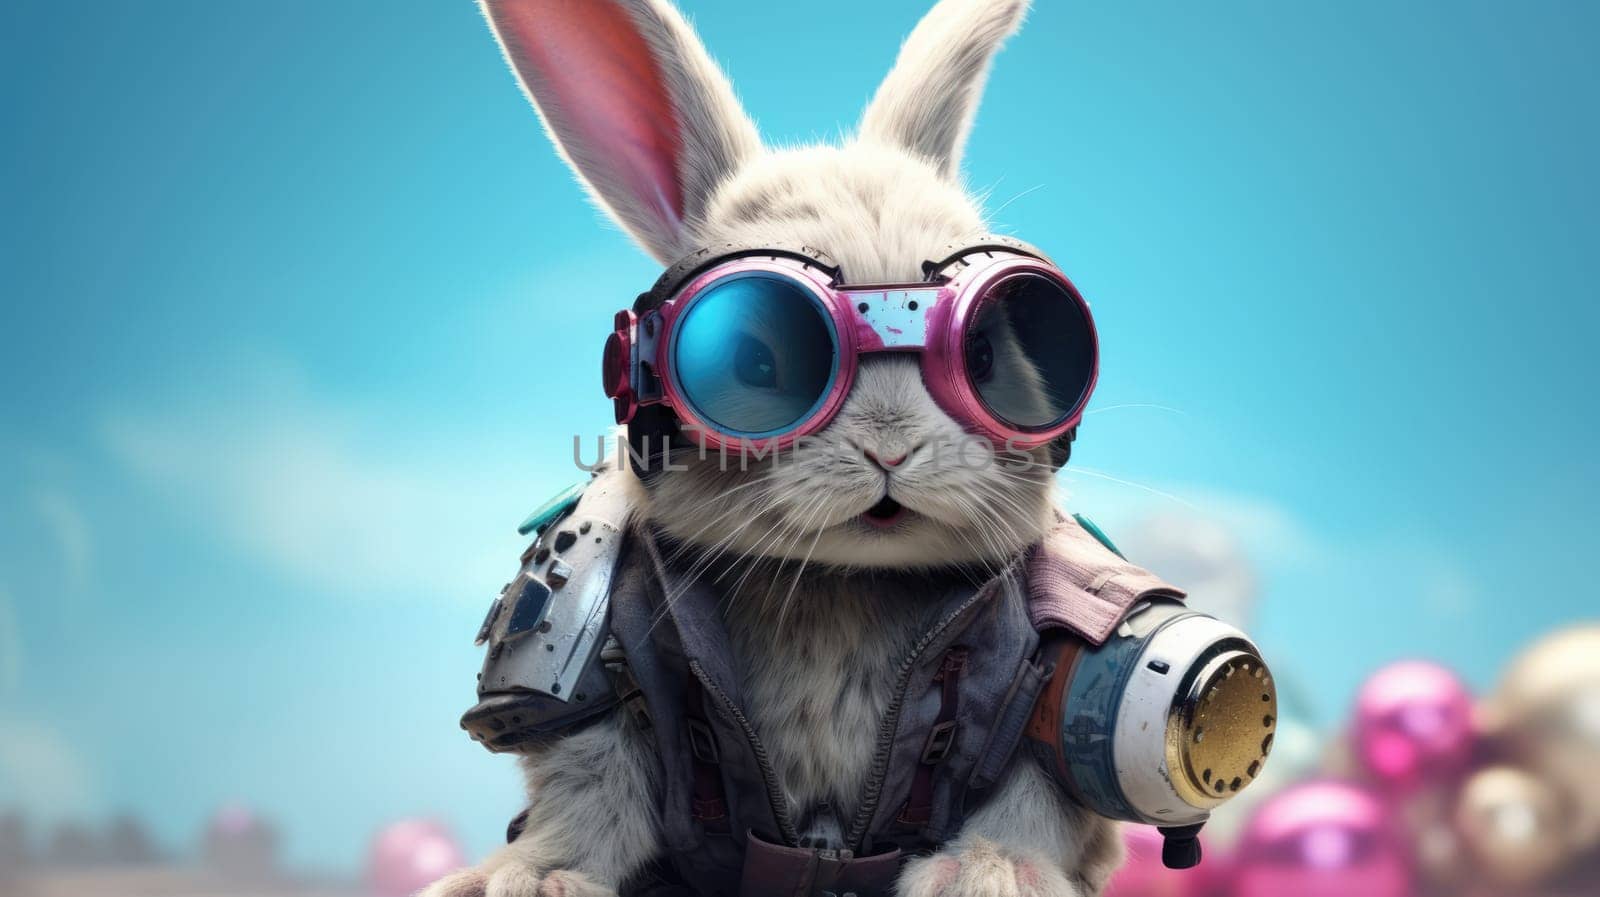 Cyberpunk Rabbit with Goggles and Retro Outfit on Blue Background with Easter eggs by JuliaDorian